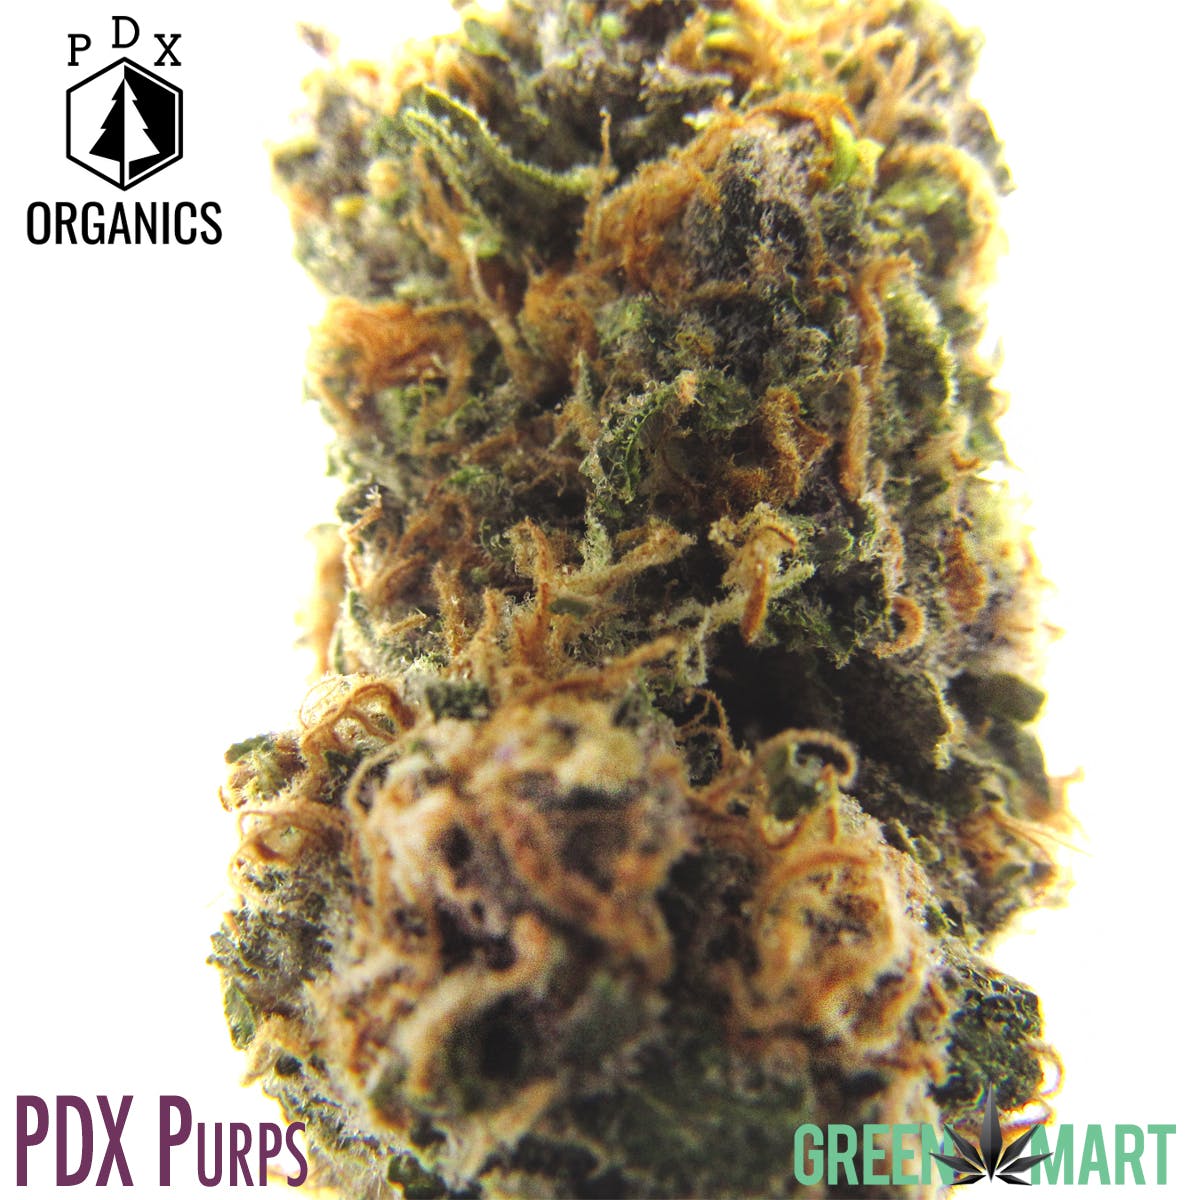 PDX Purps